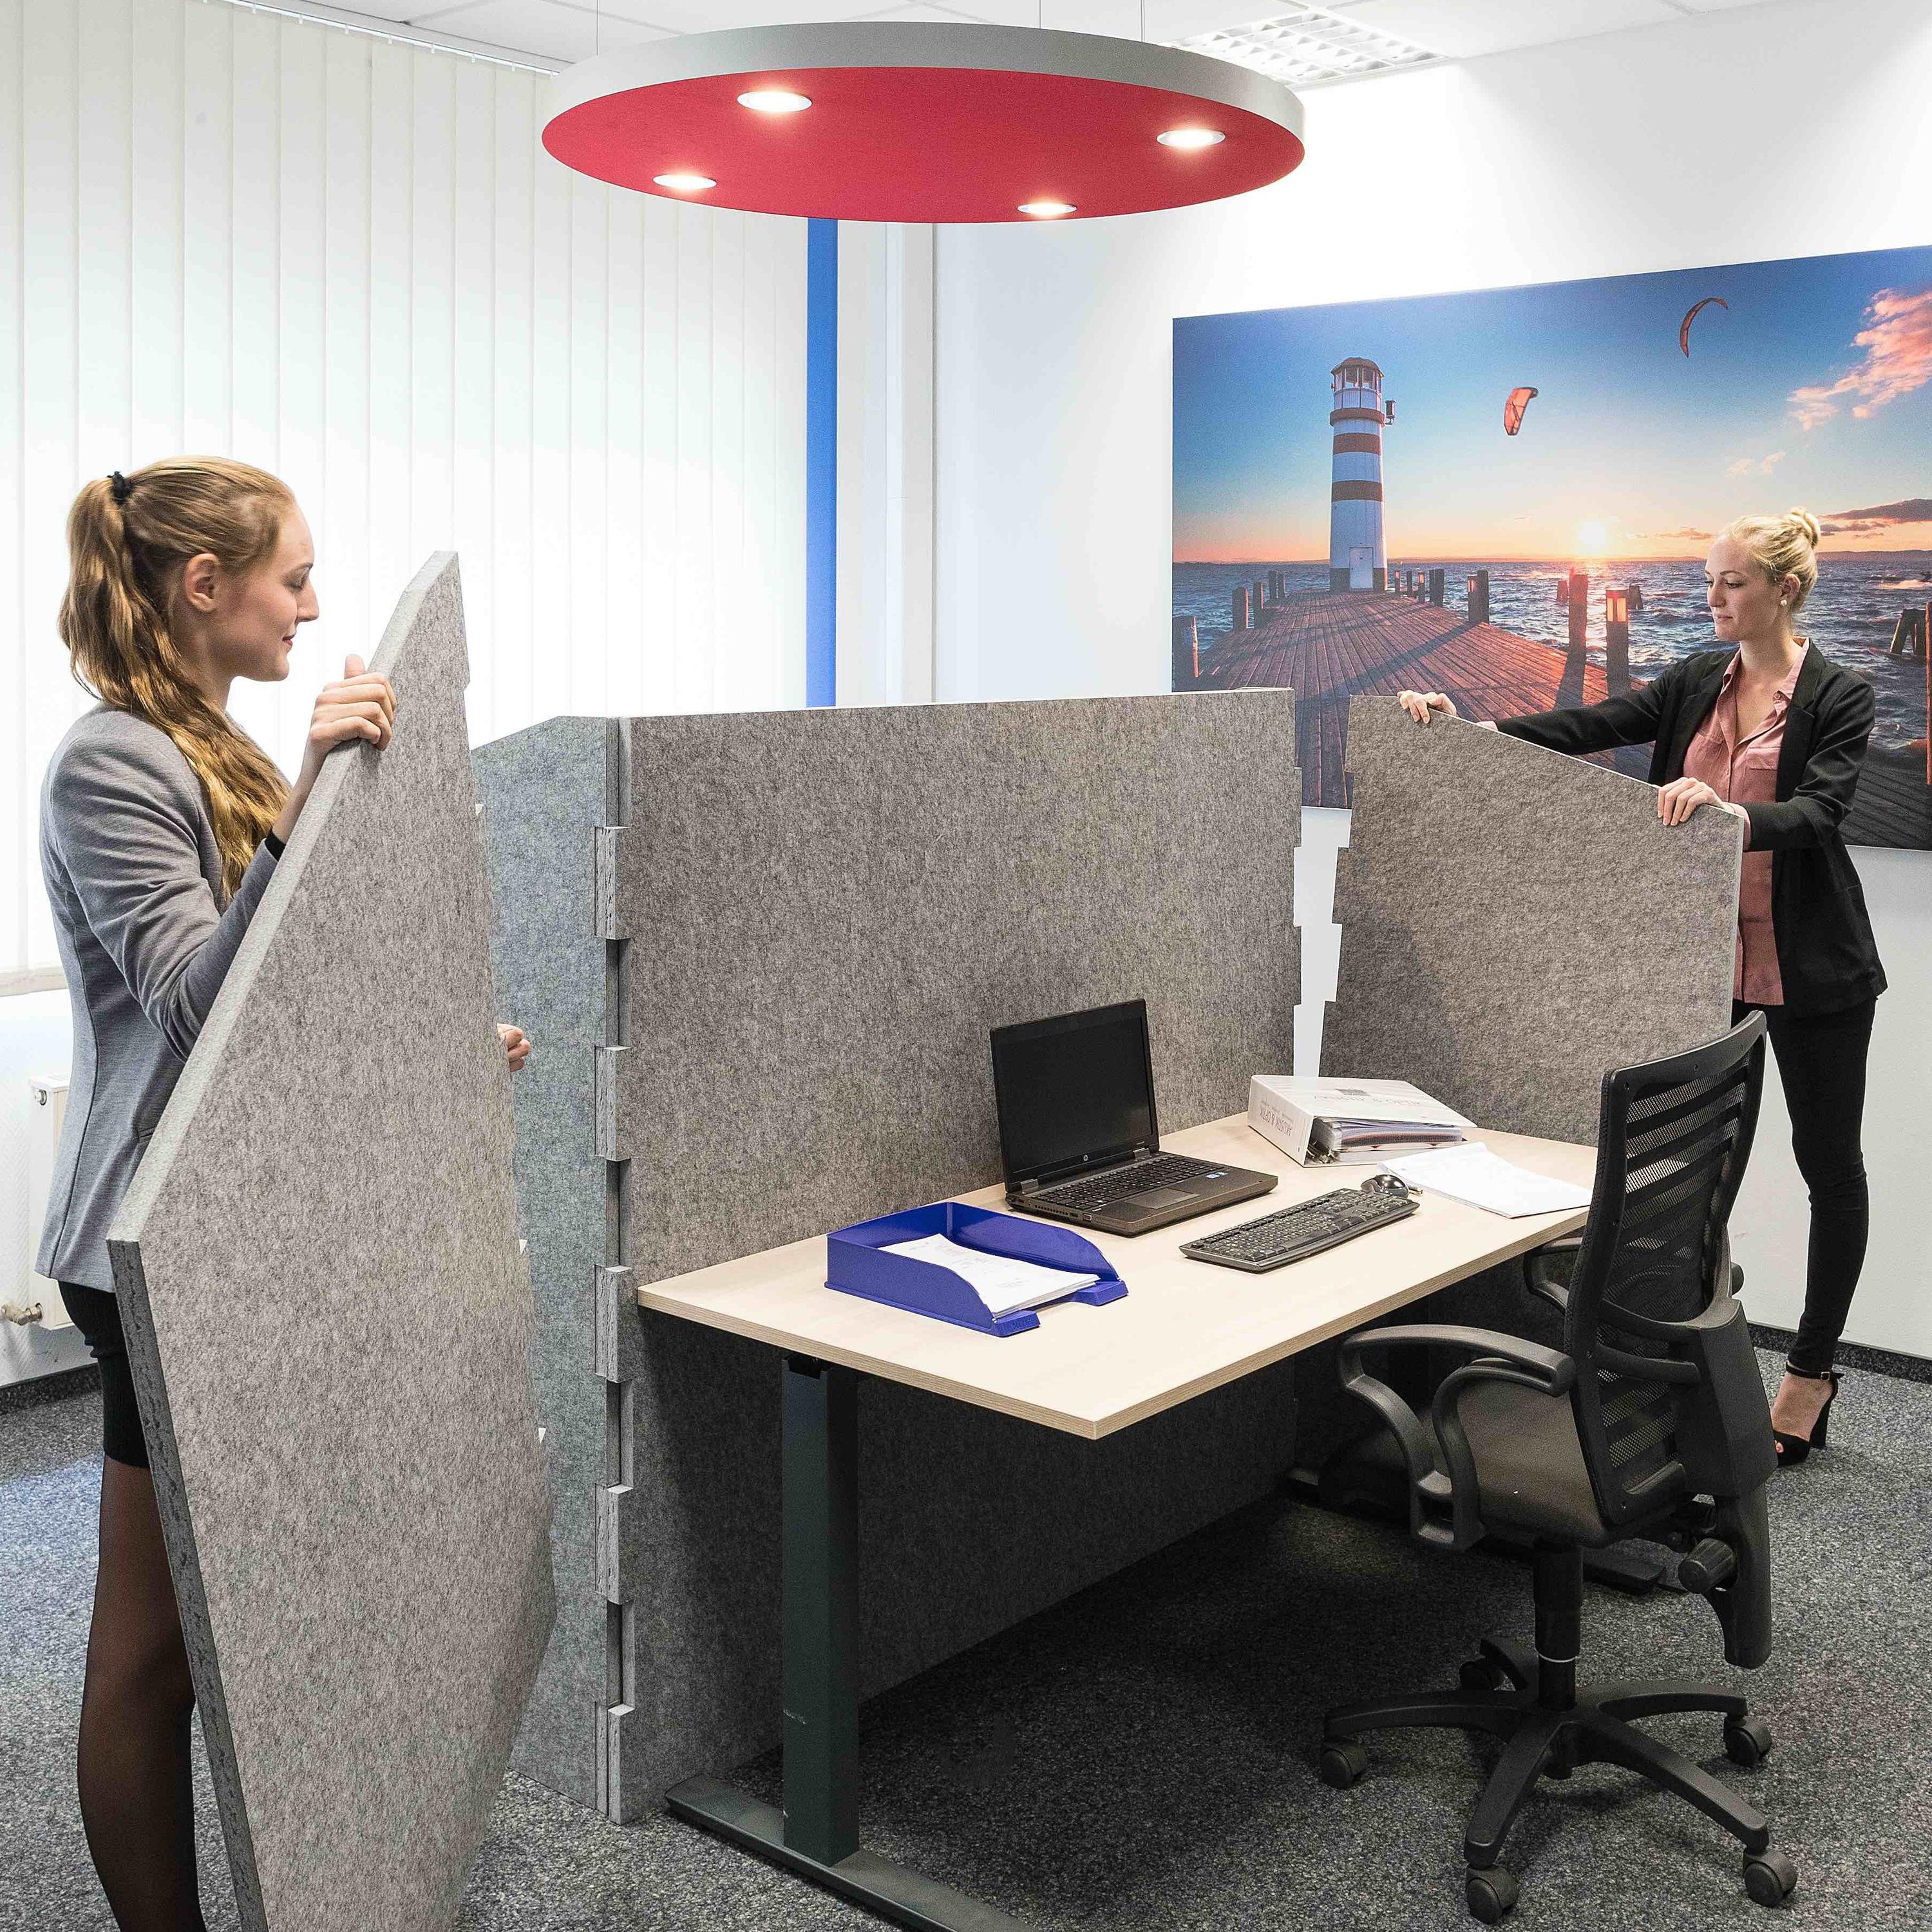 How to optimise office acoustics with 